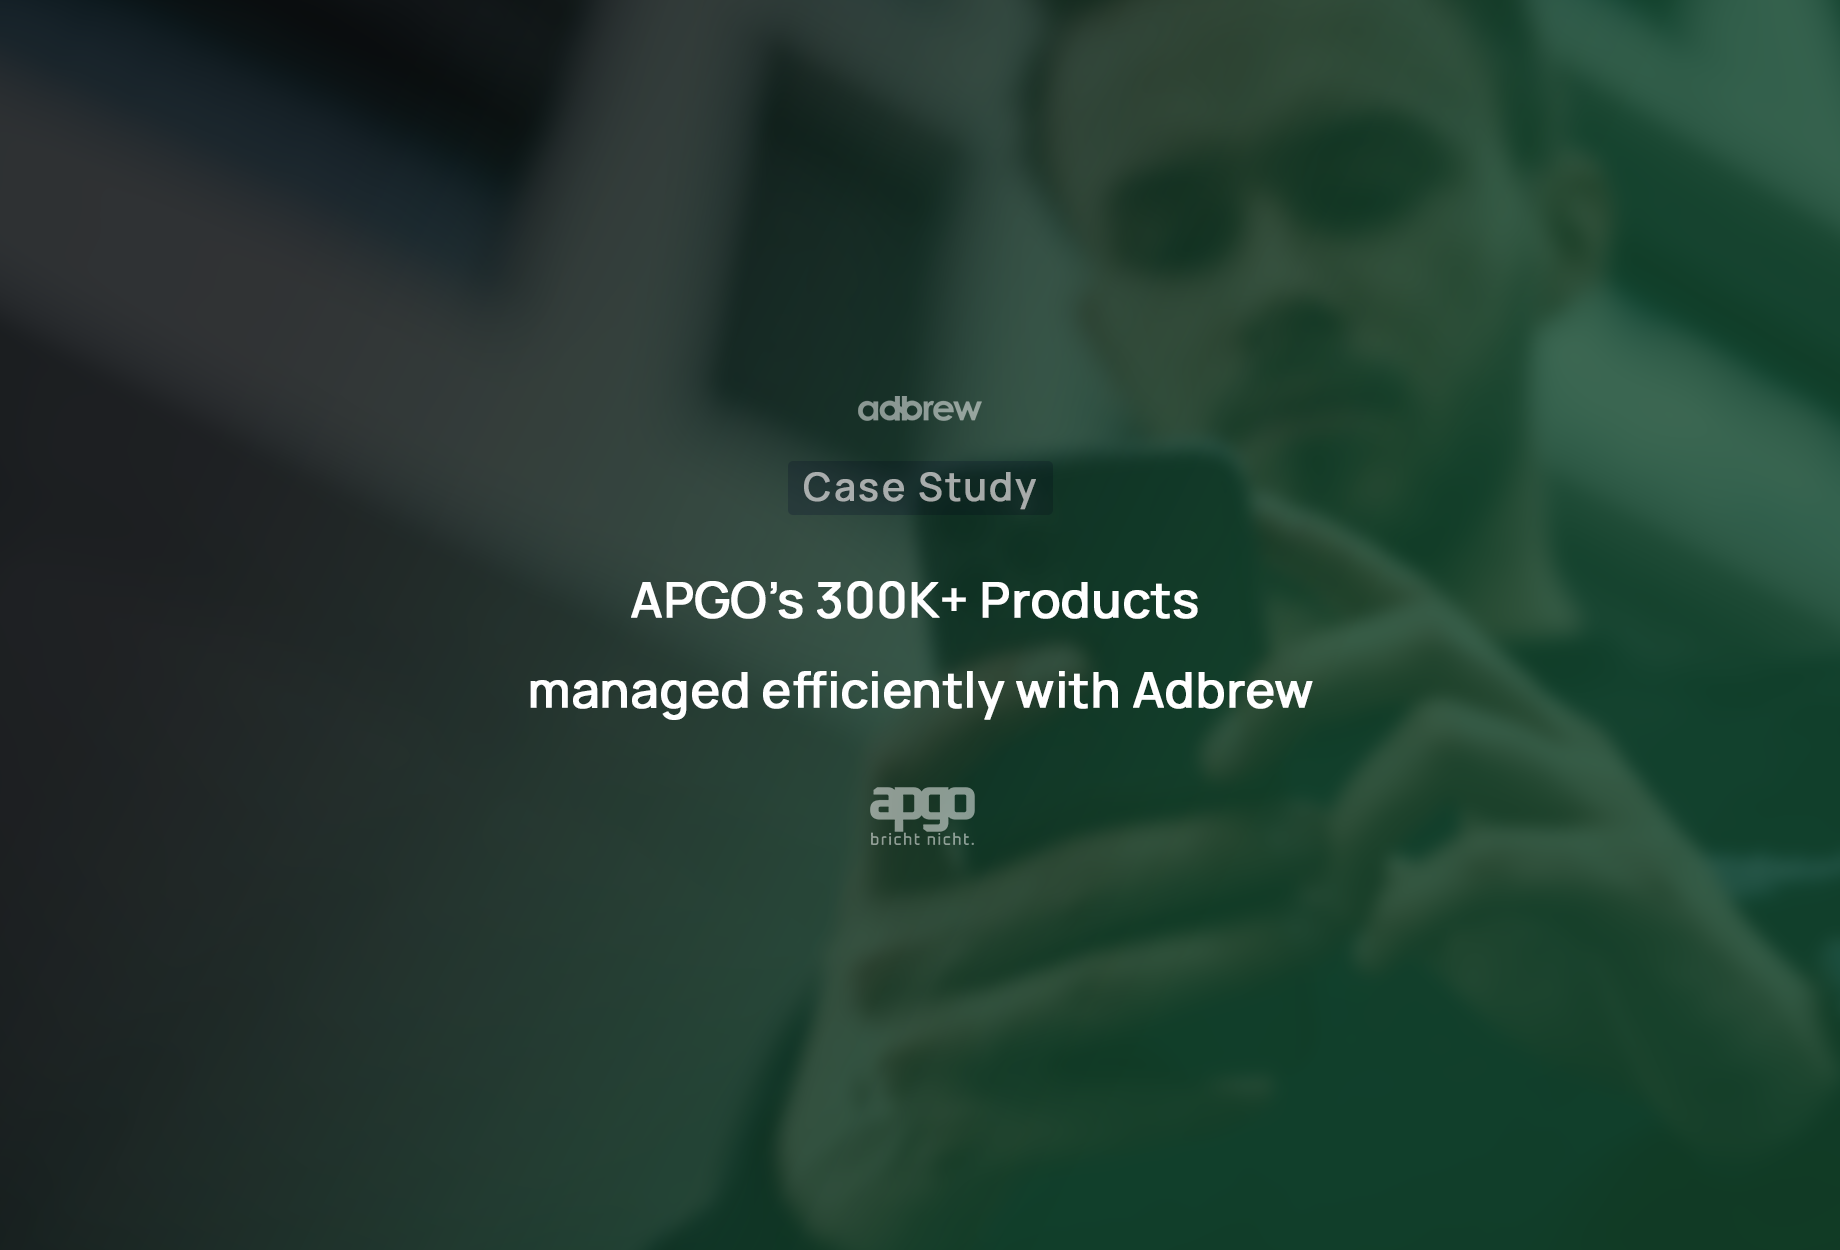 APGO’s 300K+ Products managed efficiently with Adbrew